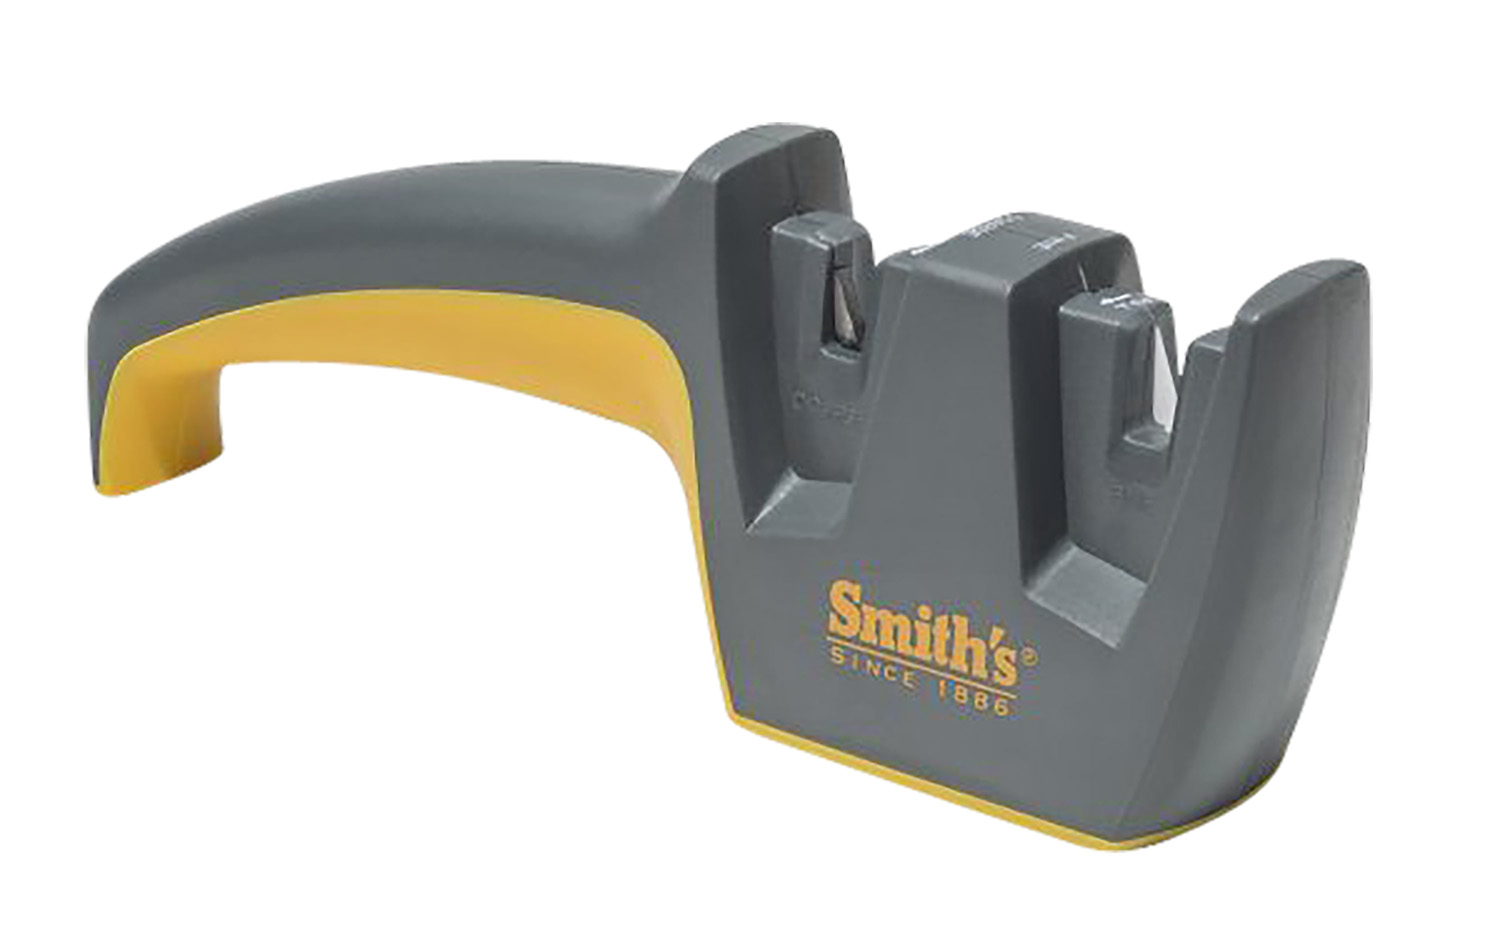 Smith's 3 Stages Manual Knife Sharpener